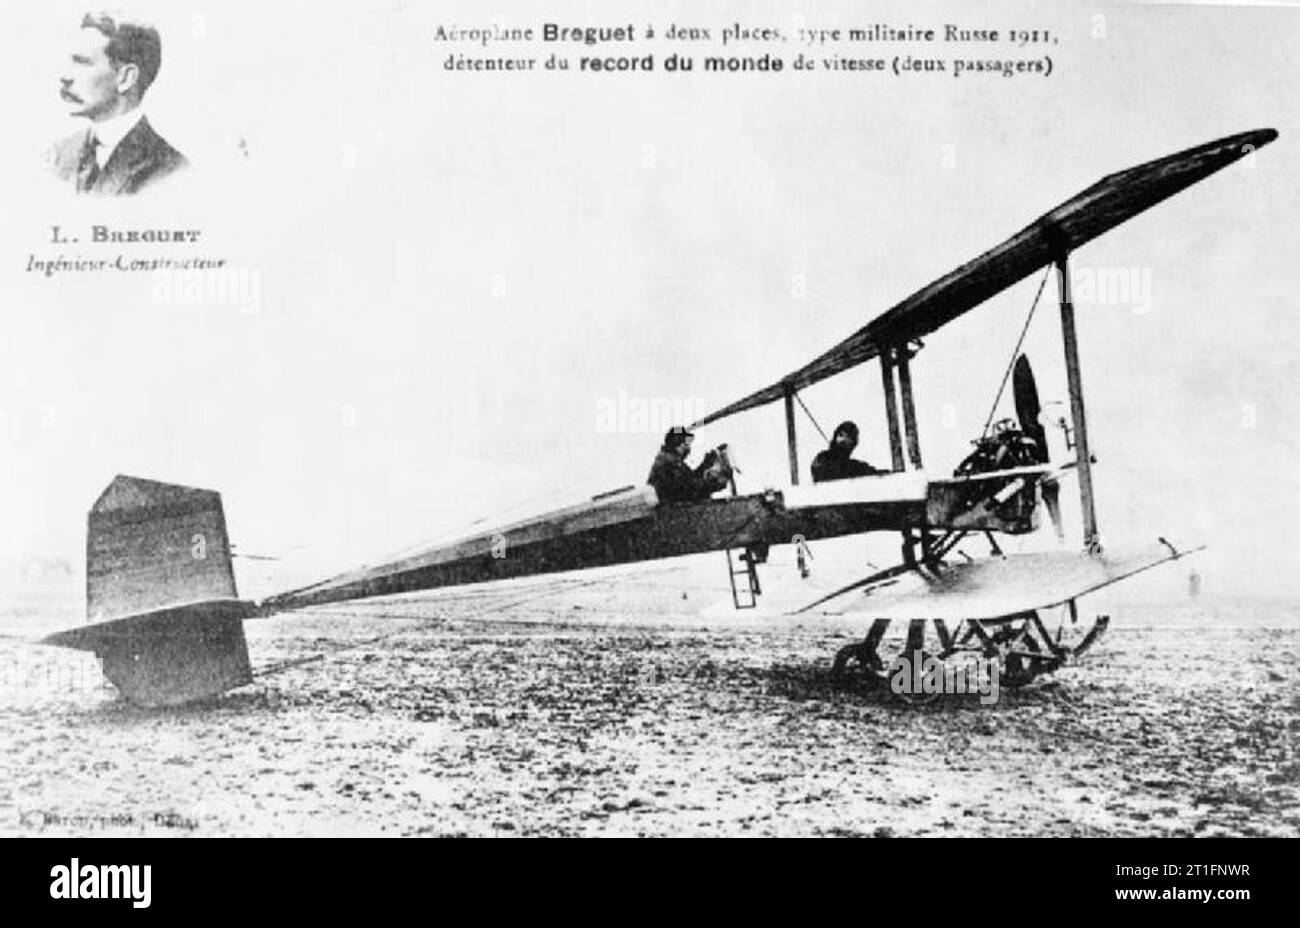 Aviation in Britain Before the First World War A Breguet two seater biplane on the ground with pilot and passenger. According to the French caption on the photograph this was the standard Russian military aircraft and holder of the world record for speed with two people. In one corner is a photograph of L Breguet with Engineer and Constructor (in French) written underneath. There is very little tone in the image. Stock Photo